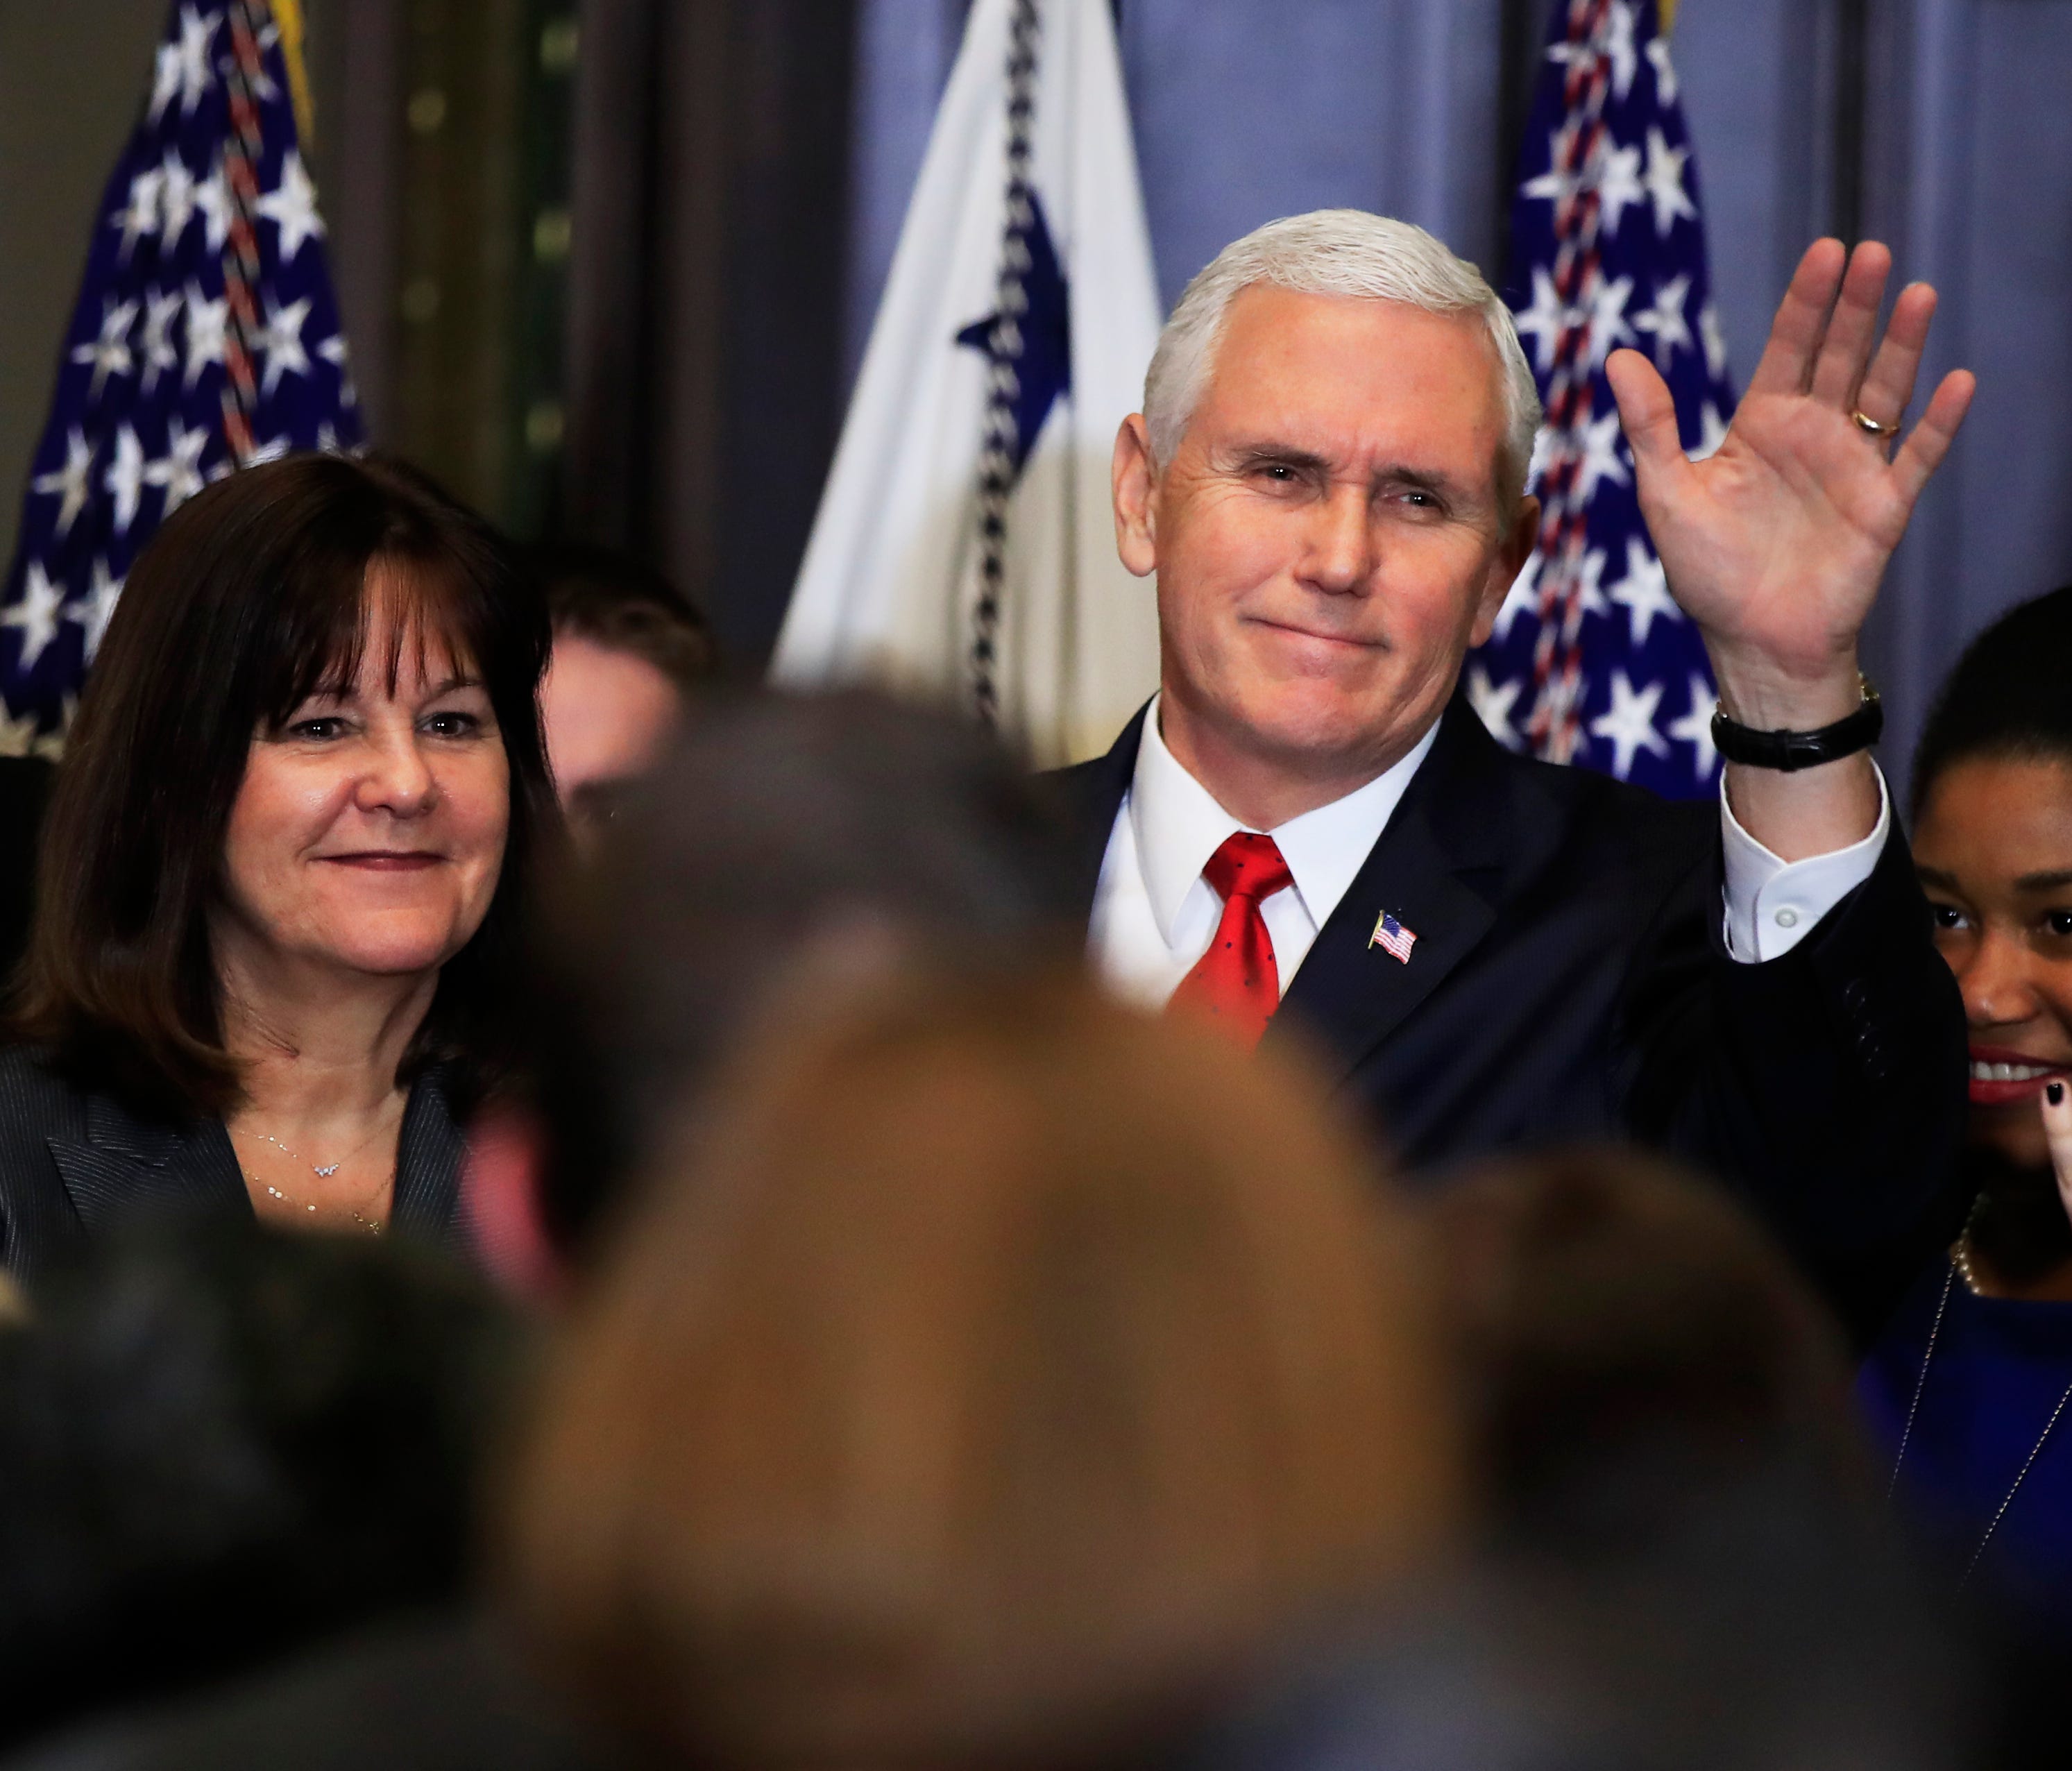 Vice President Pence with his wife Karen Pence, waves to anti-abortion supporters and participants of the annual March for Life event, during a reception in the Indian Treaty Room at the Eisenhower Executive Office Building  Thursday.